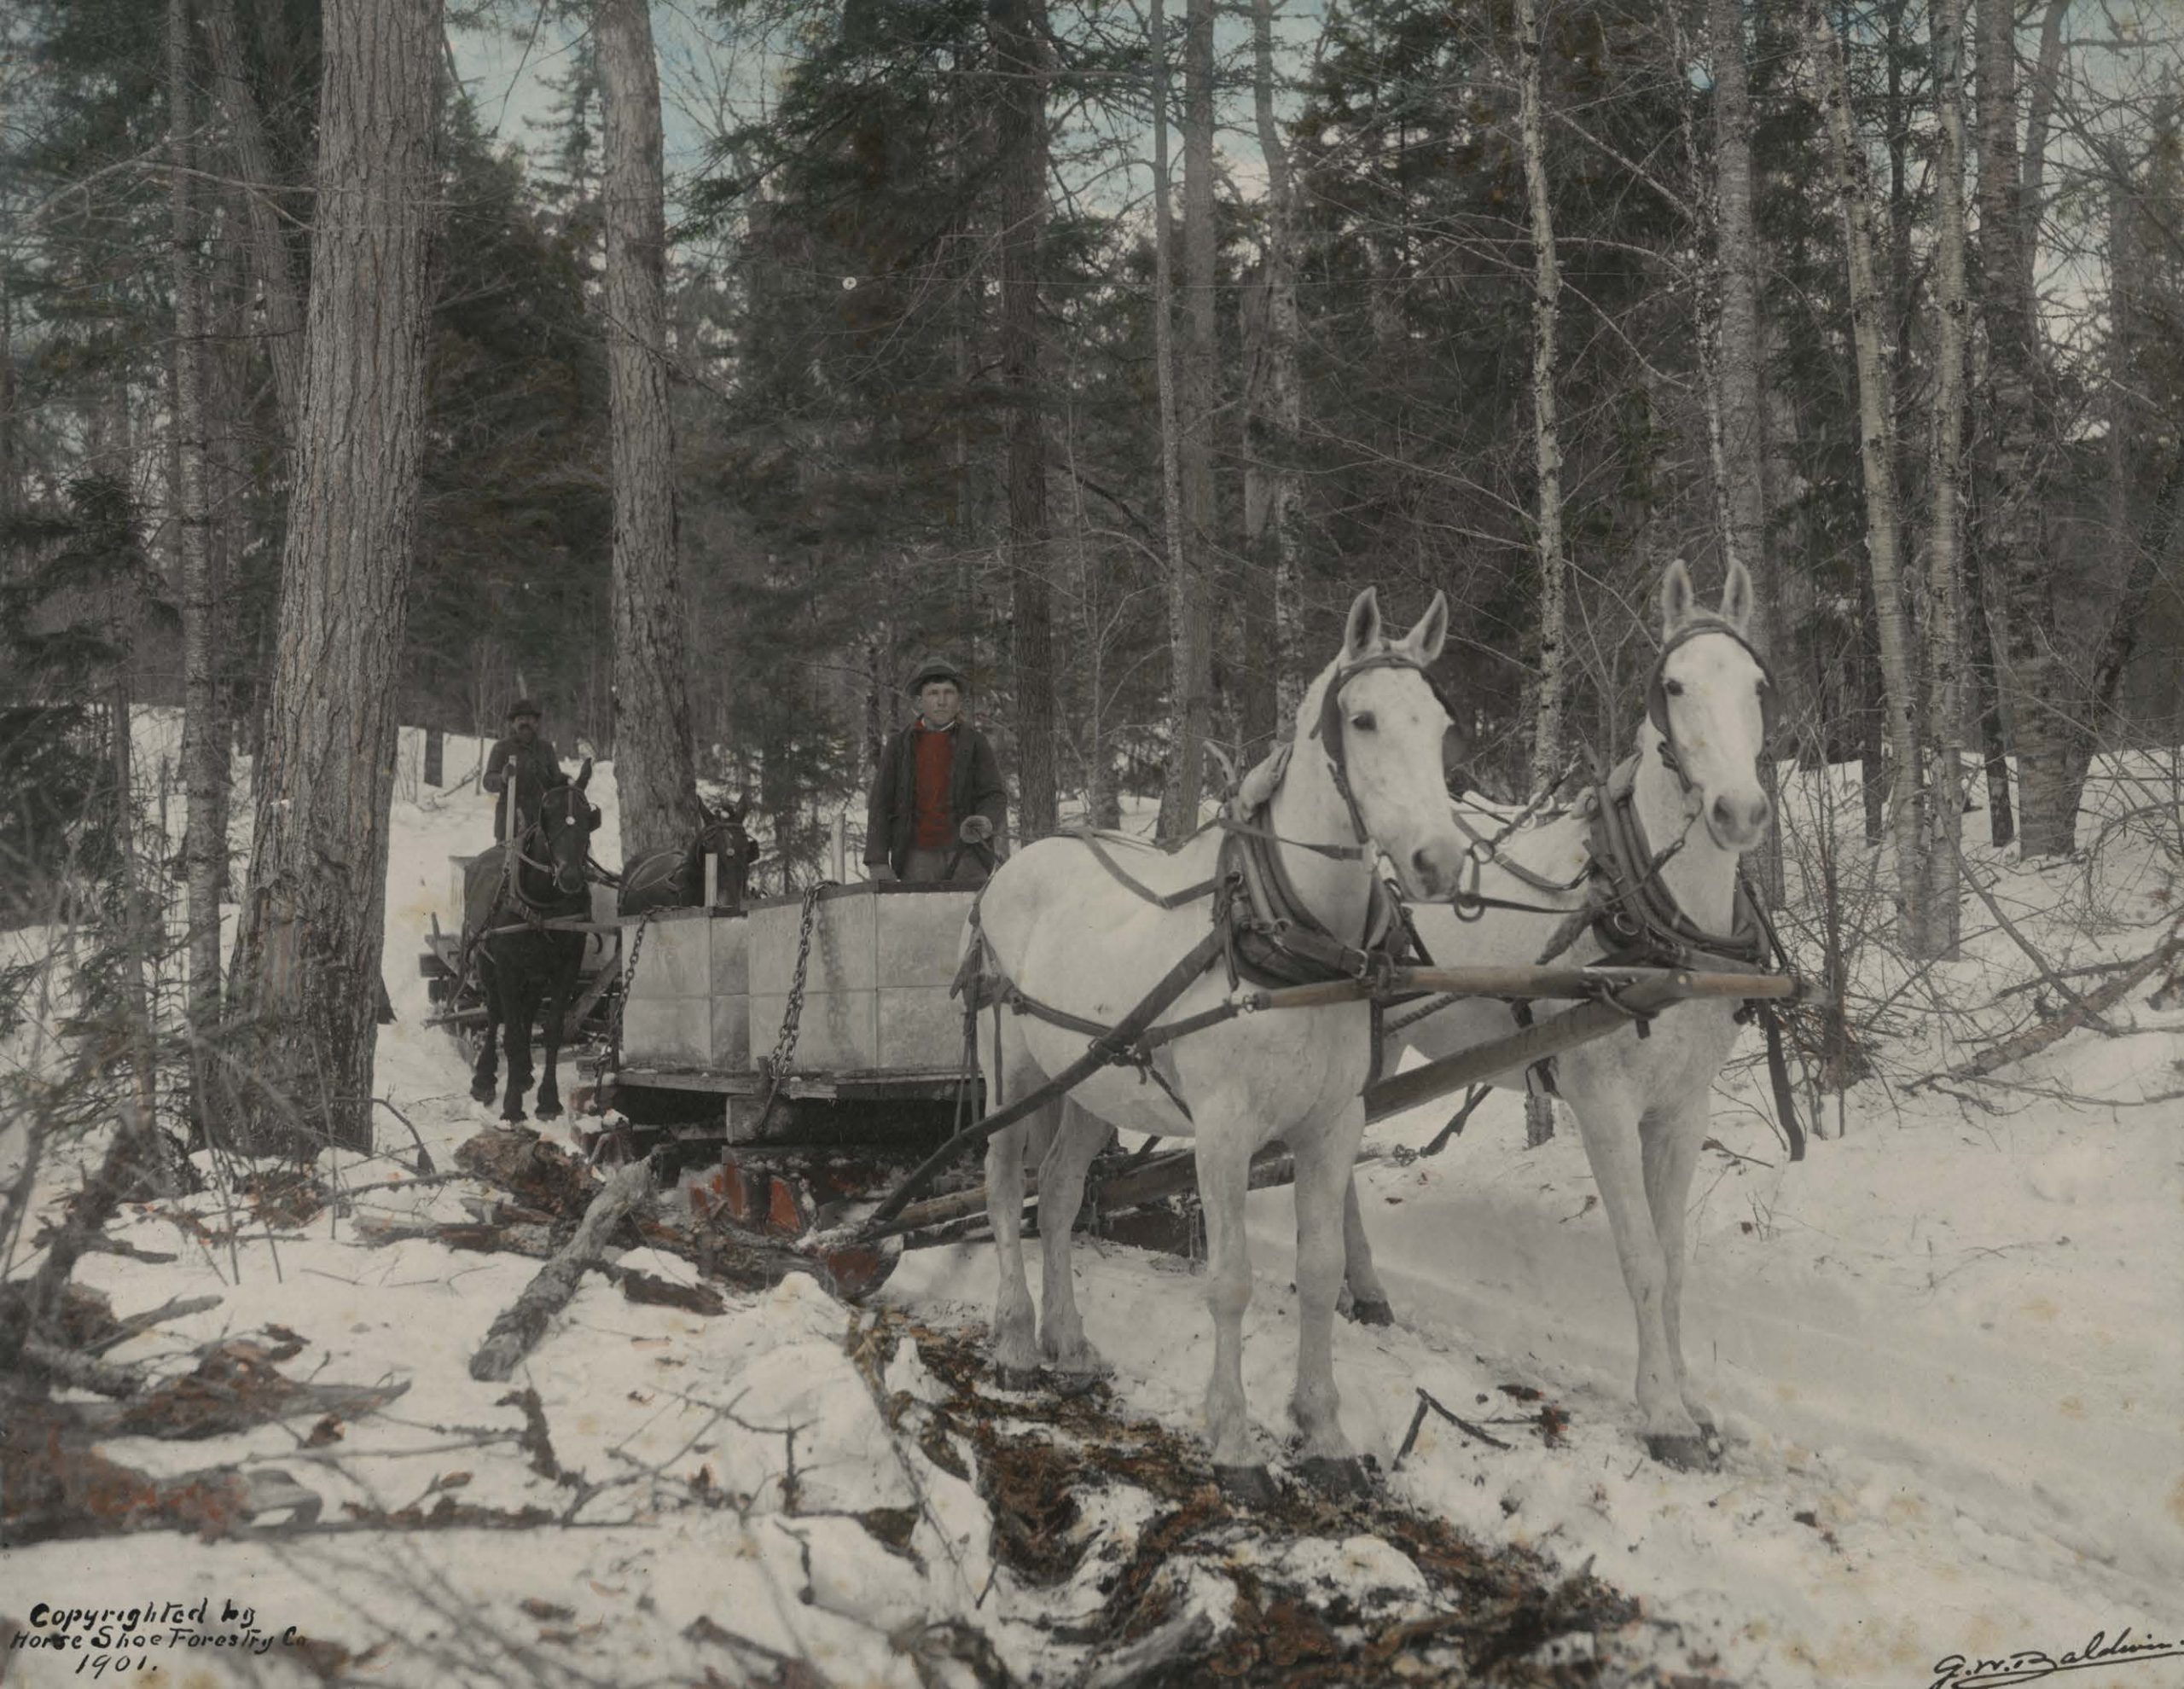 Workers on horse drawn sleigh for maple sap collection